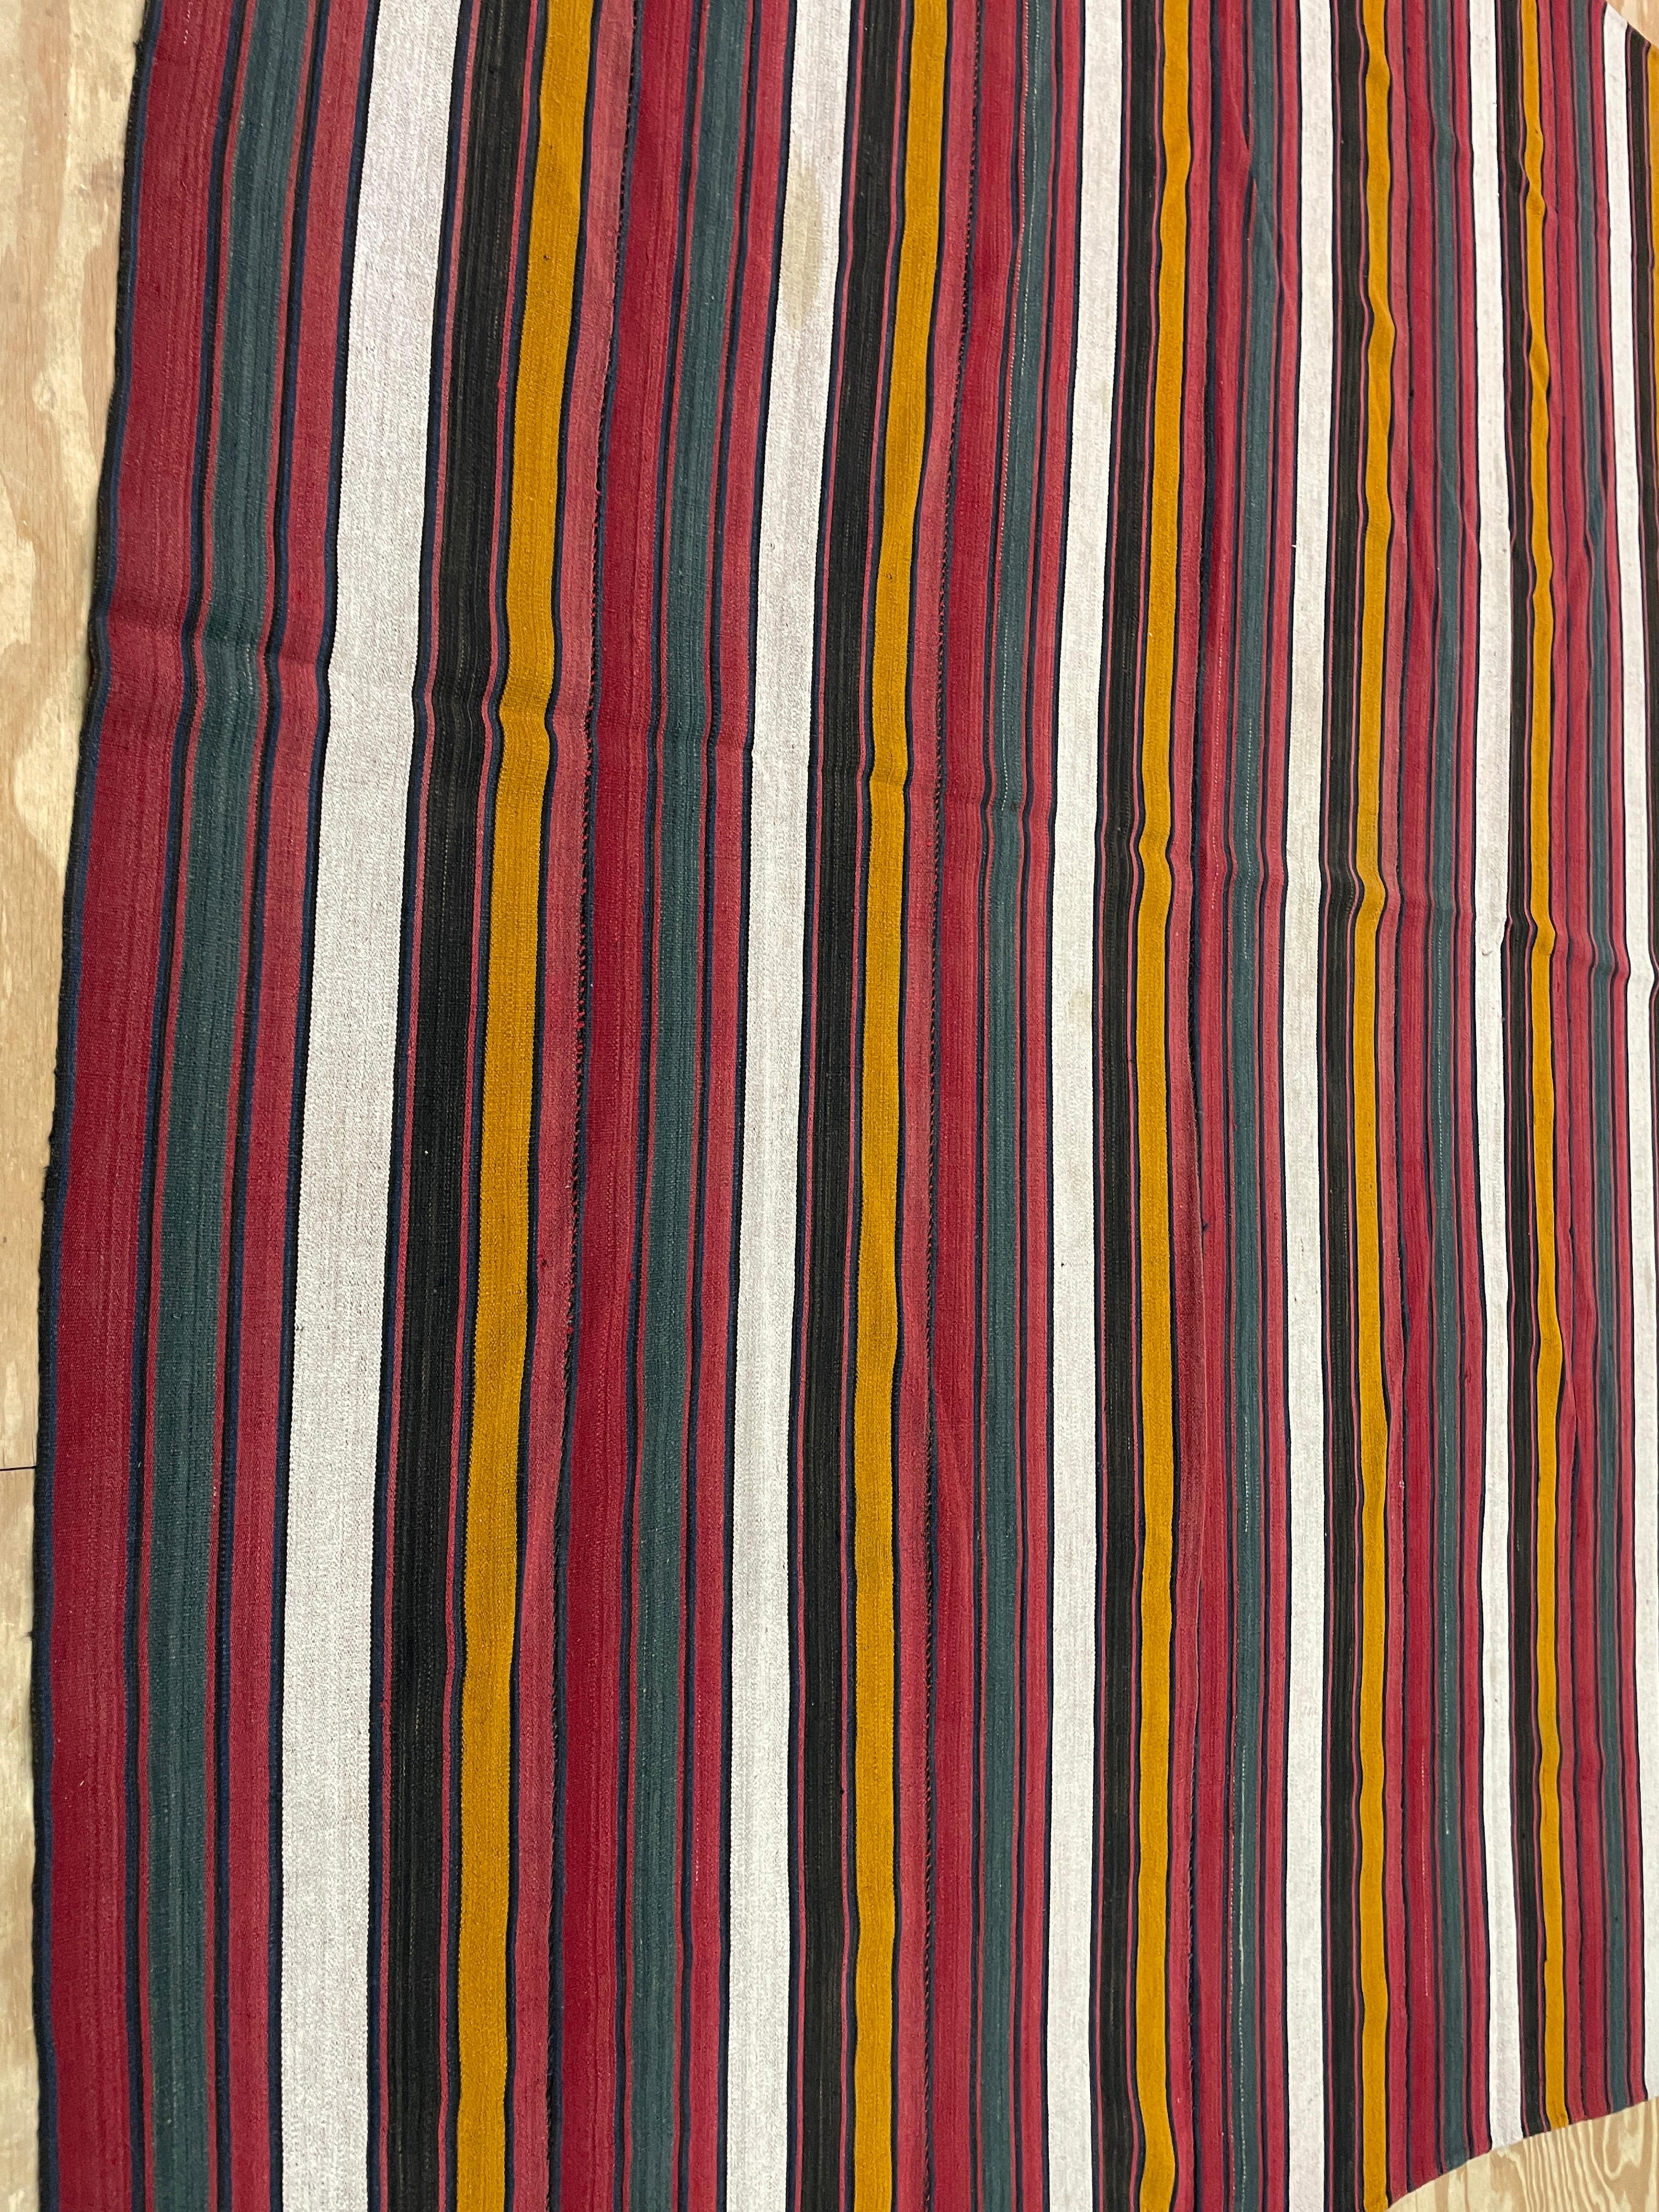 Cicim or Jijim or Jajim: Kilims woven in narrow strips that are sewn together.
Most Kilims are slit woven. Larger antique Kilims were woven in two to three separate sections on small nomadic horizontal floor looms in three feet wide long strips,